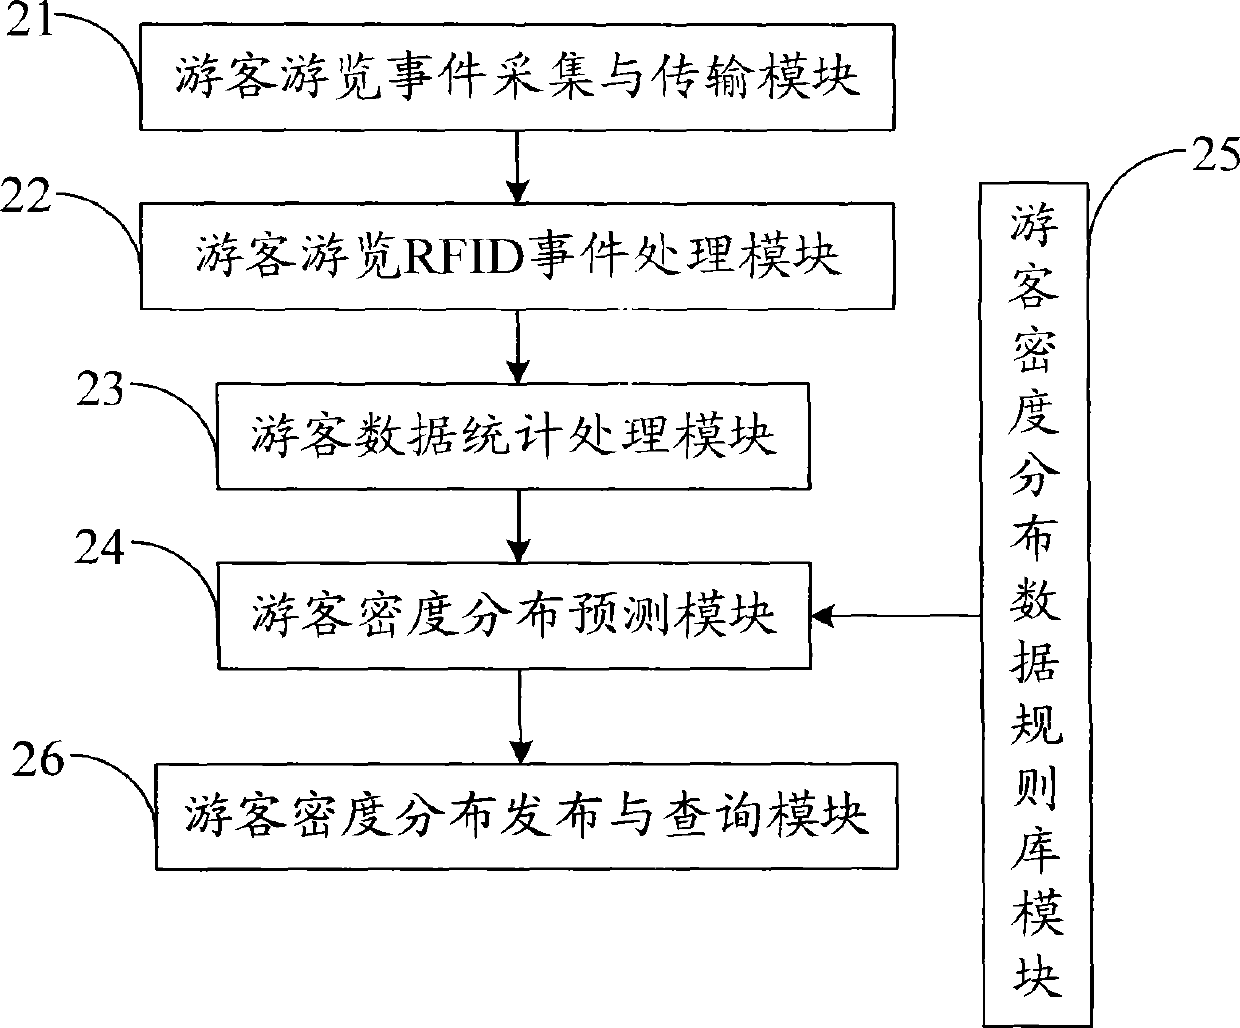 Method and system for statistics and process of tourist density distribution